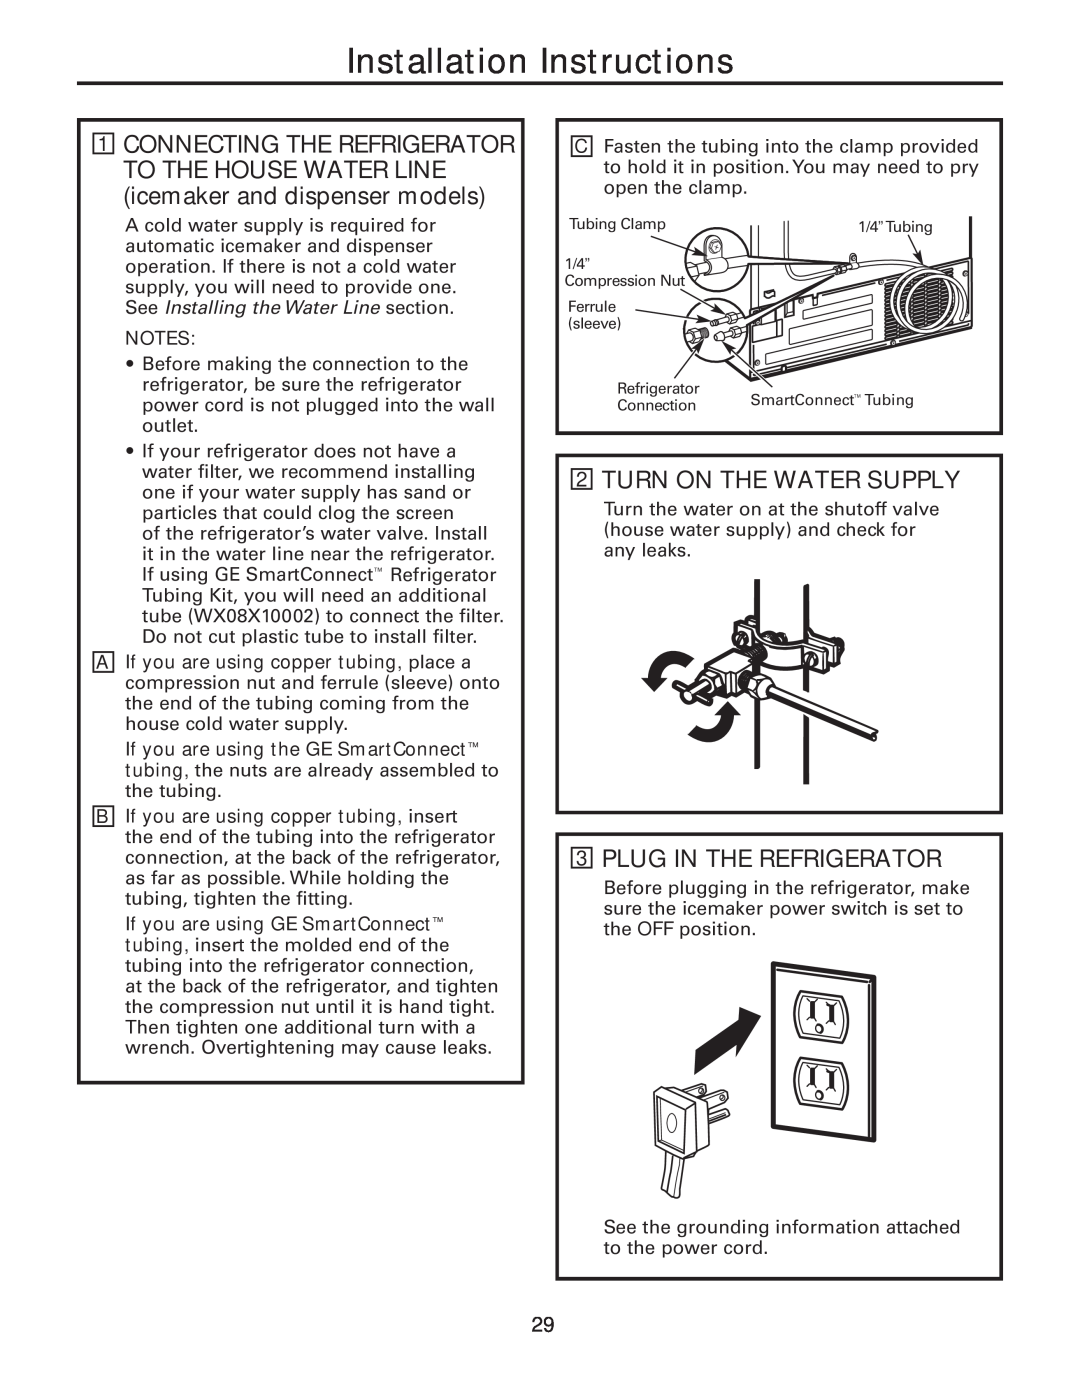 GE 200D8074P043, 49-60637 manual Turn On The Water Supply, Plug In The Refrigerator, Installation Instructions 